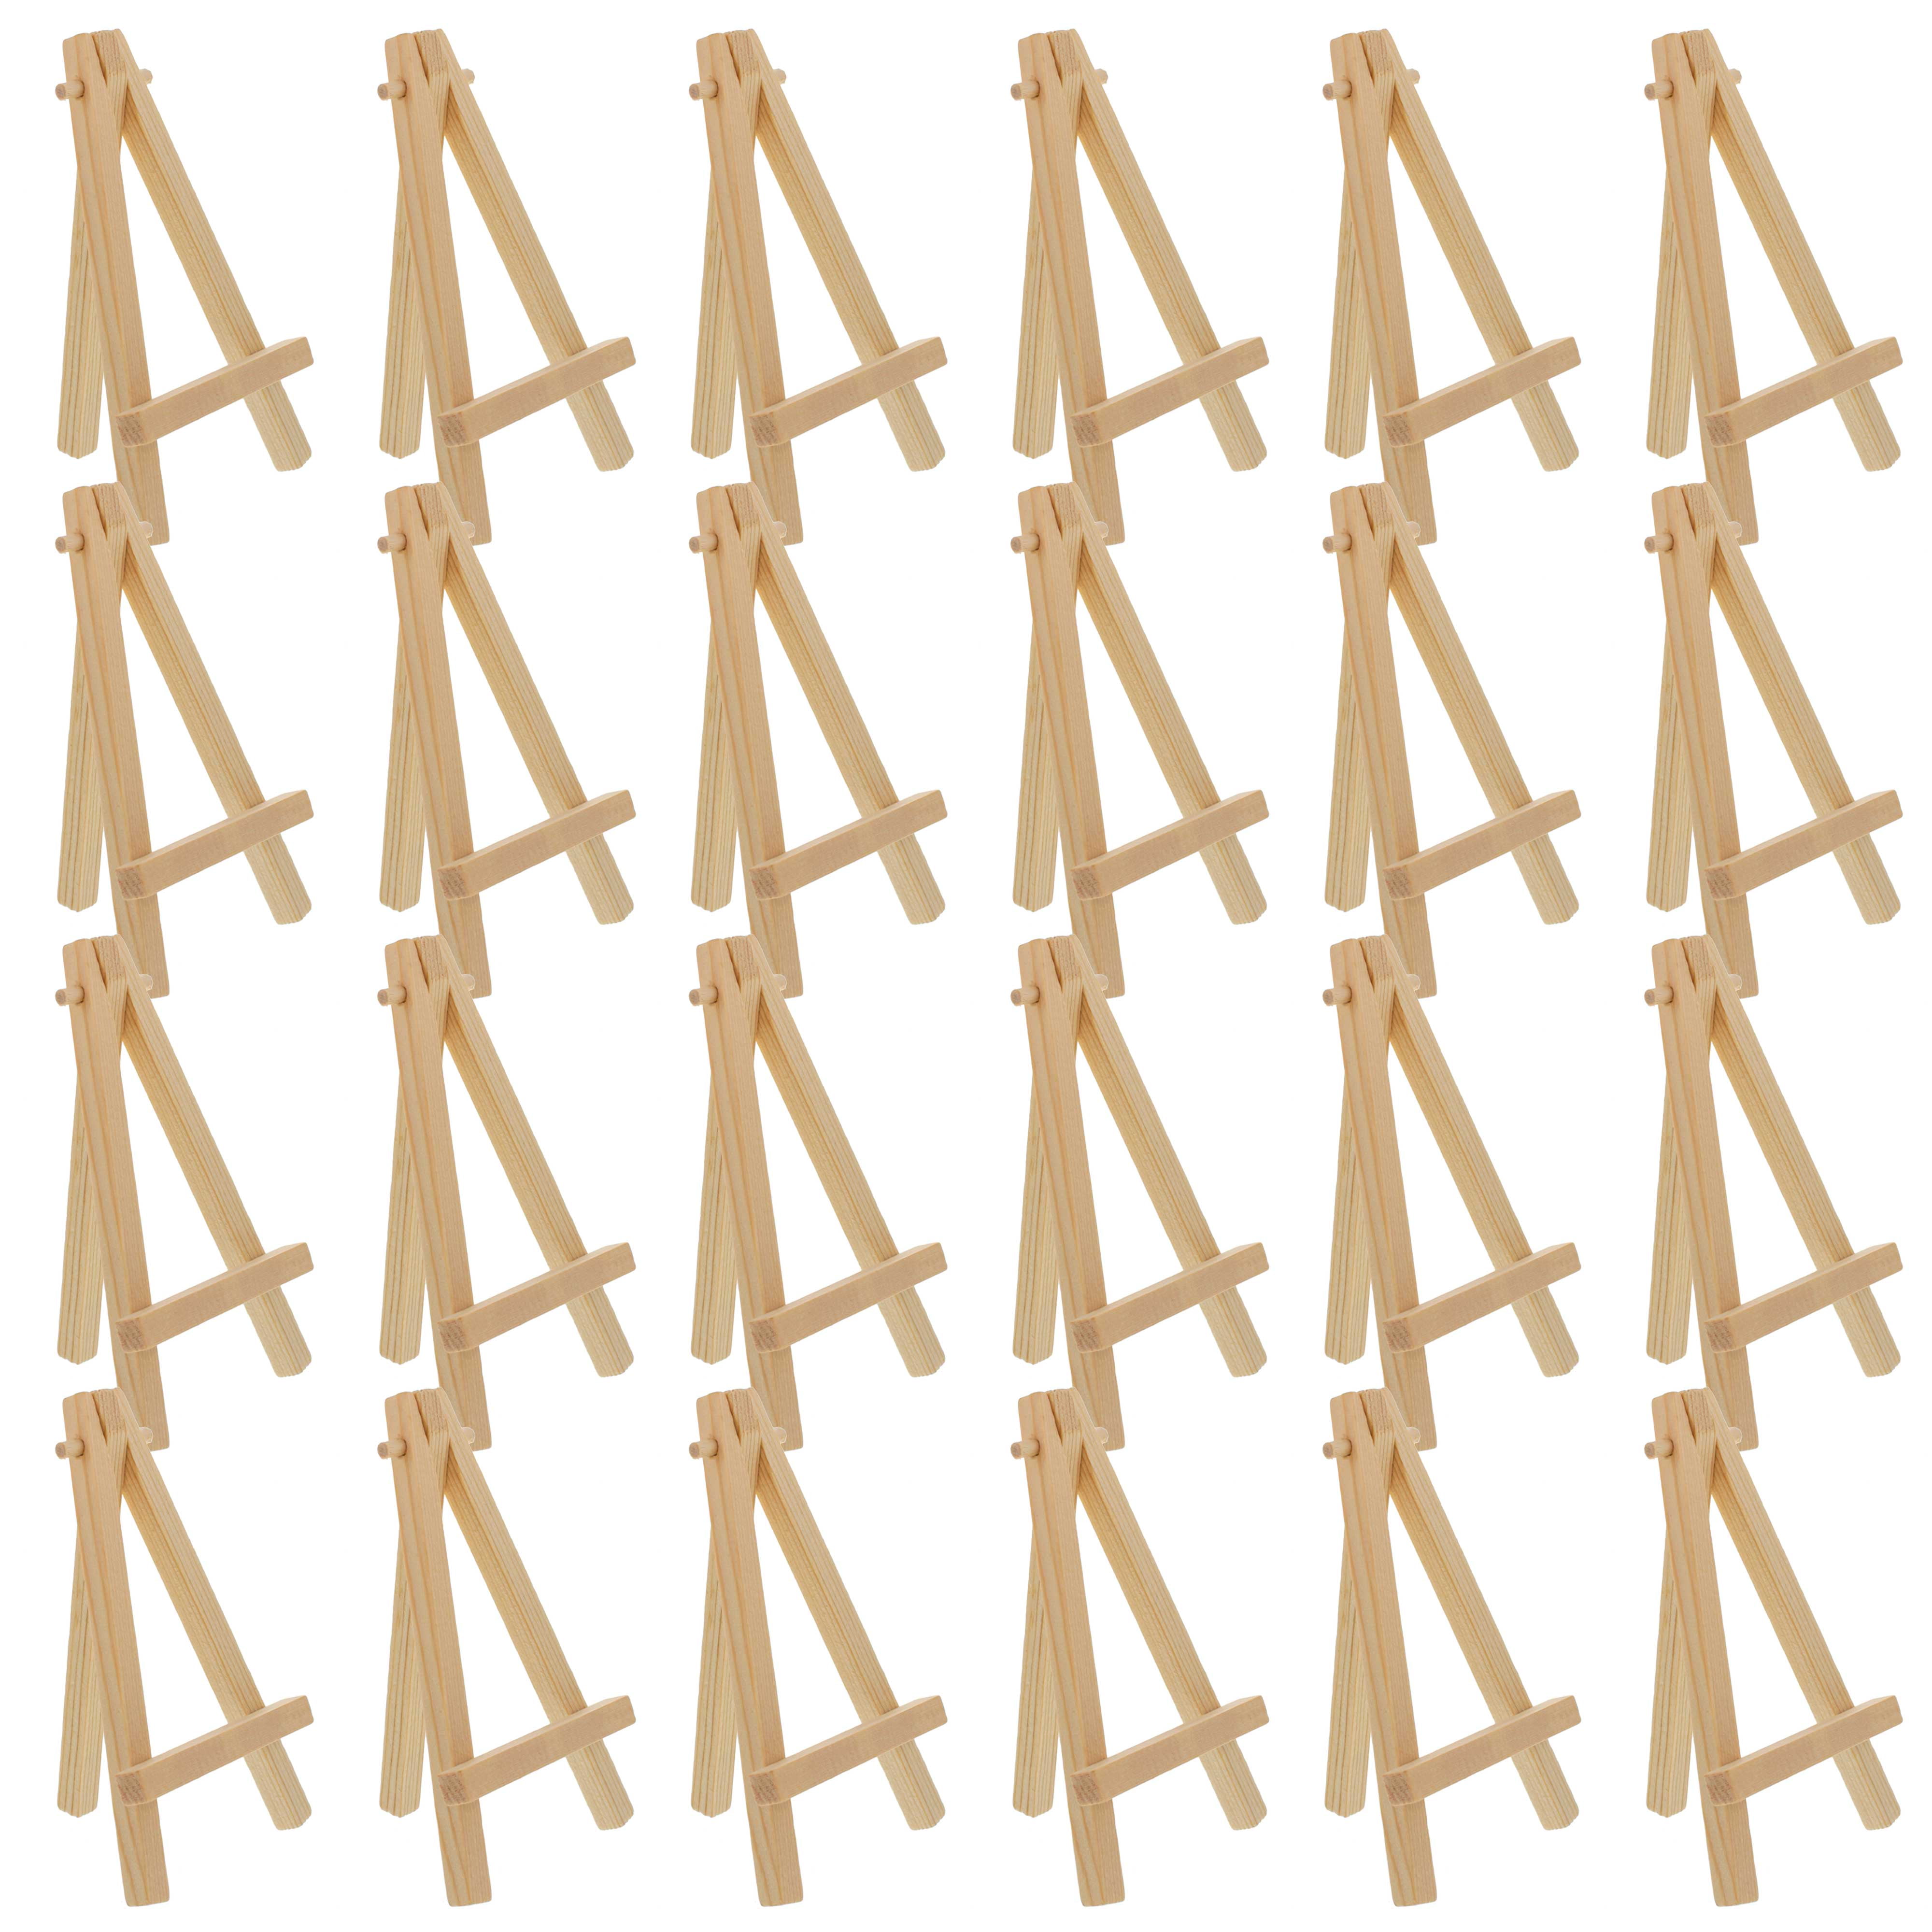 Pack of 12 Easels SL crafts 2.75 Inch By 4.7 Inch Mini Wooden Easels Display 